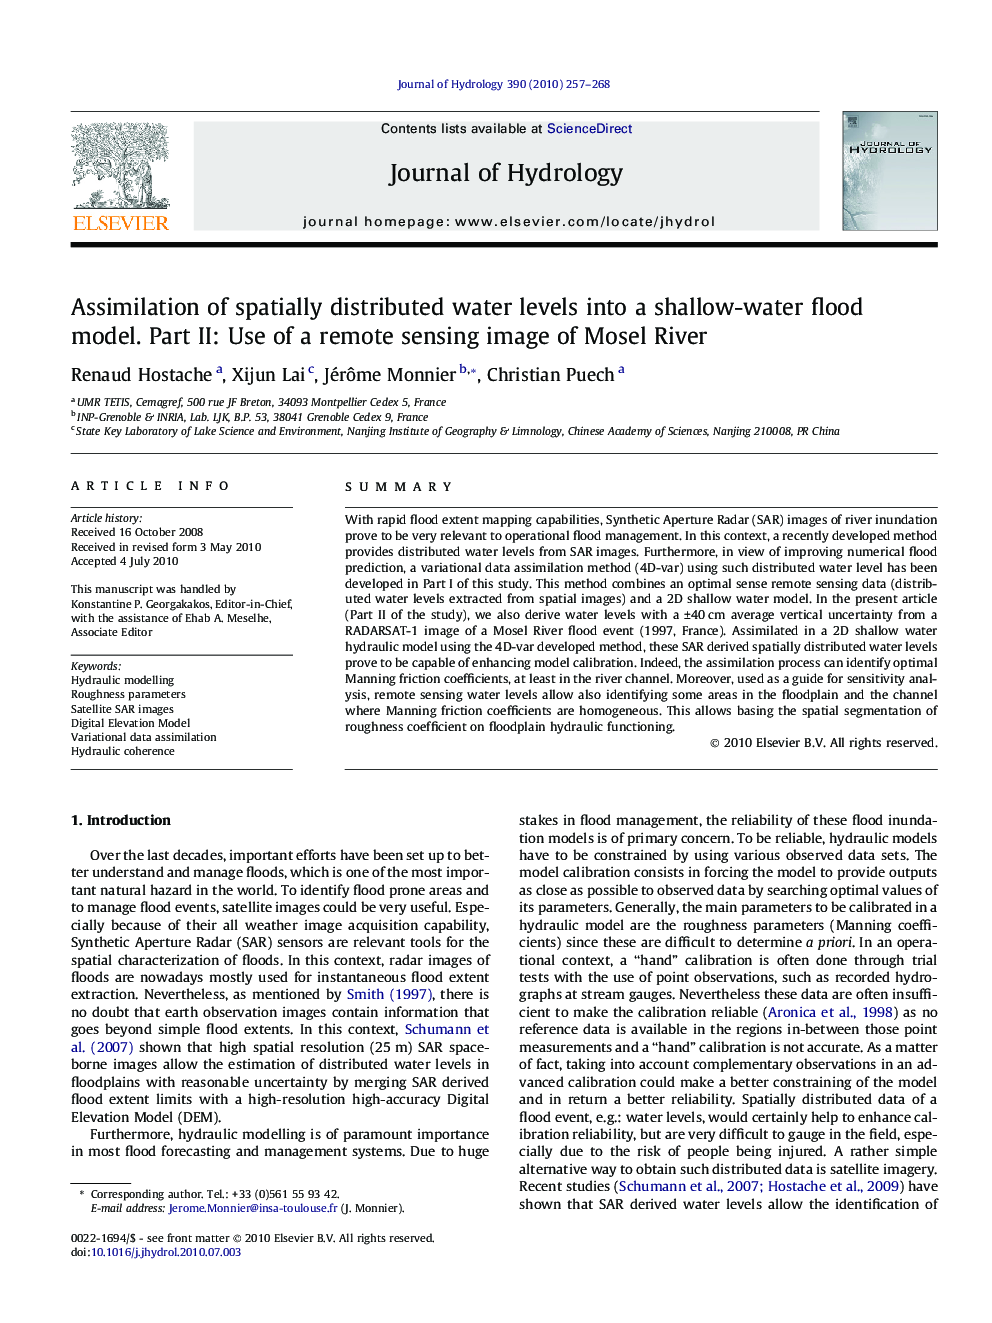 Assimilation of spatially distributed water levels into a shallow-water flood model. Part II: Use of a remote sensing image of Mosel River